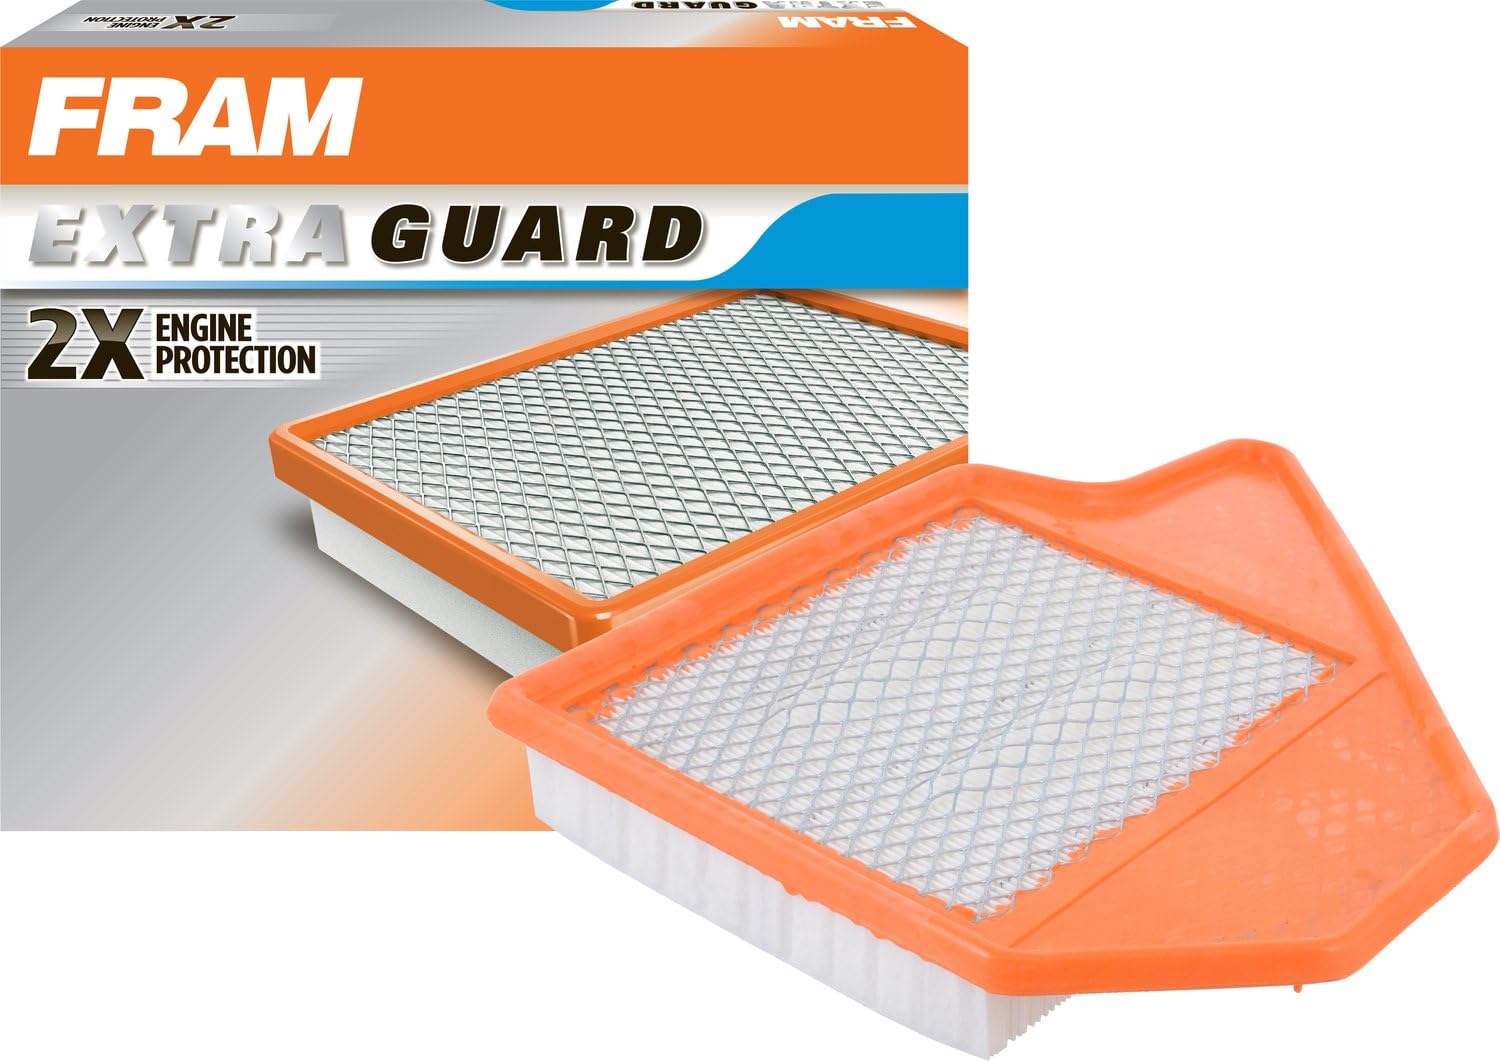 FRAM Extra Guard CA11050 Replacement Engine Air Filter for Select Chrysler, Dodge, Ram and Volkswagen Vehicles